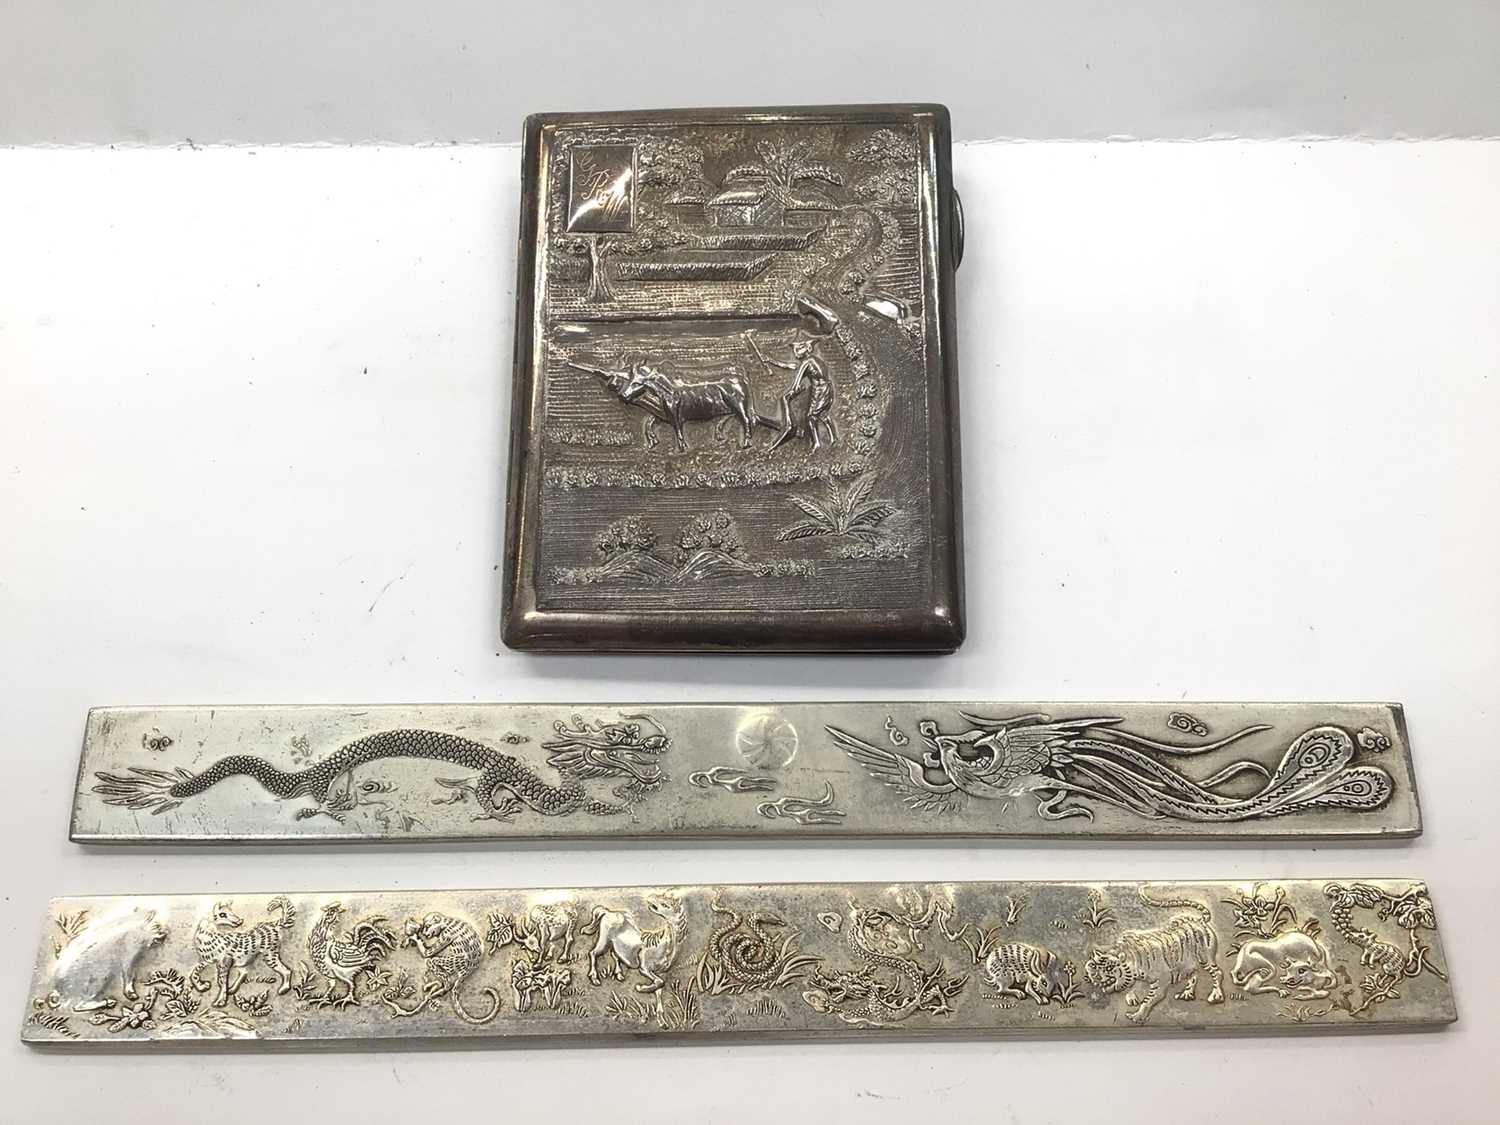 Burmese silver cigarette case with farming scene decoration, together with a pair of Chinese silver